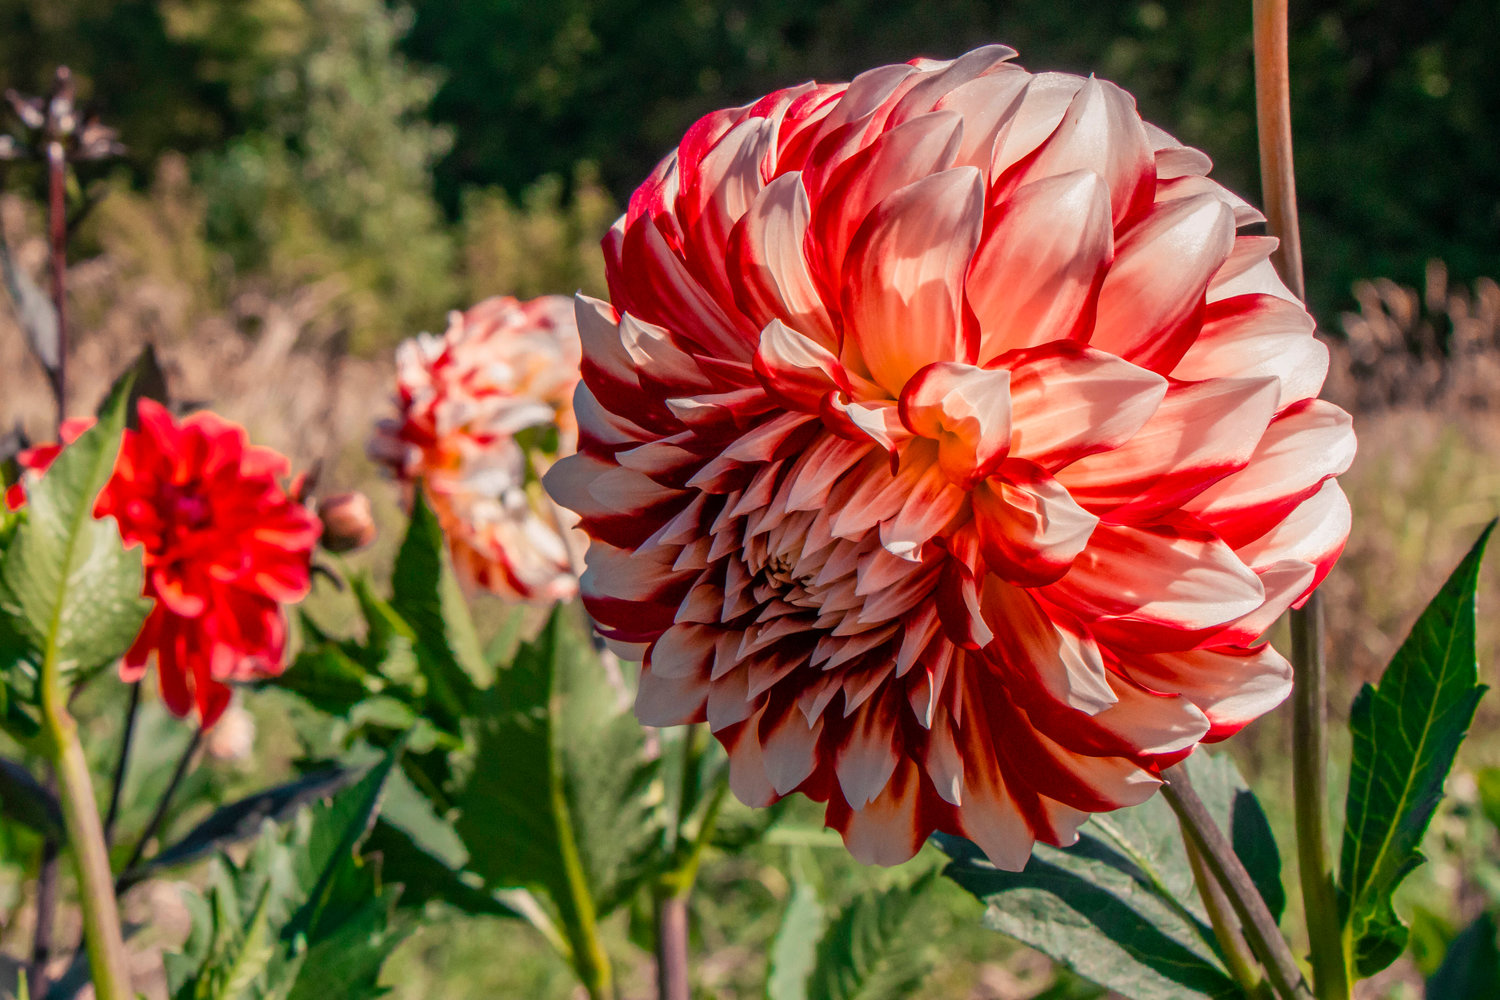 A Dahlia flower is on display at Foggy 48 Farms in Rochester on Tuesday.